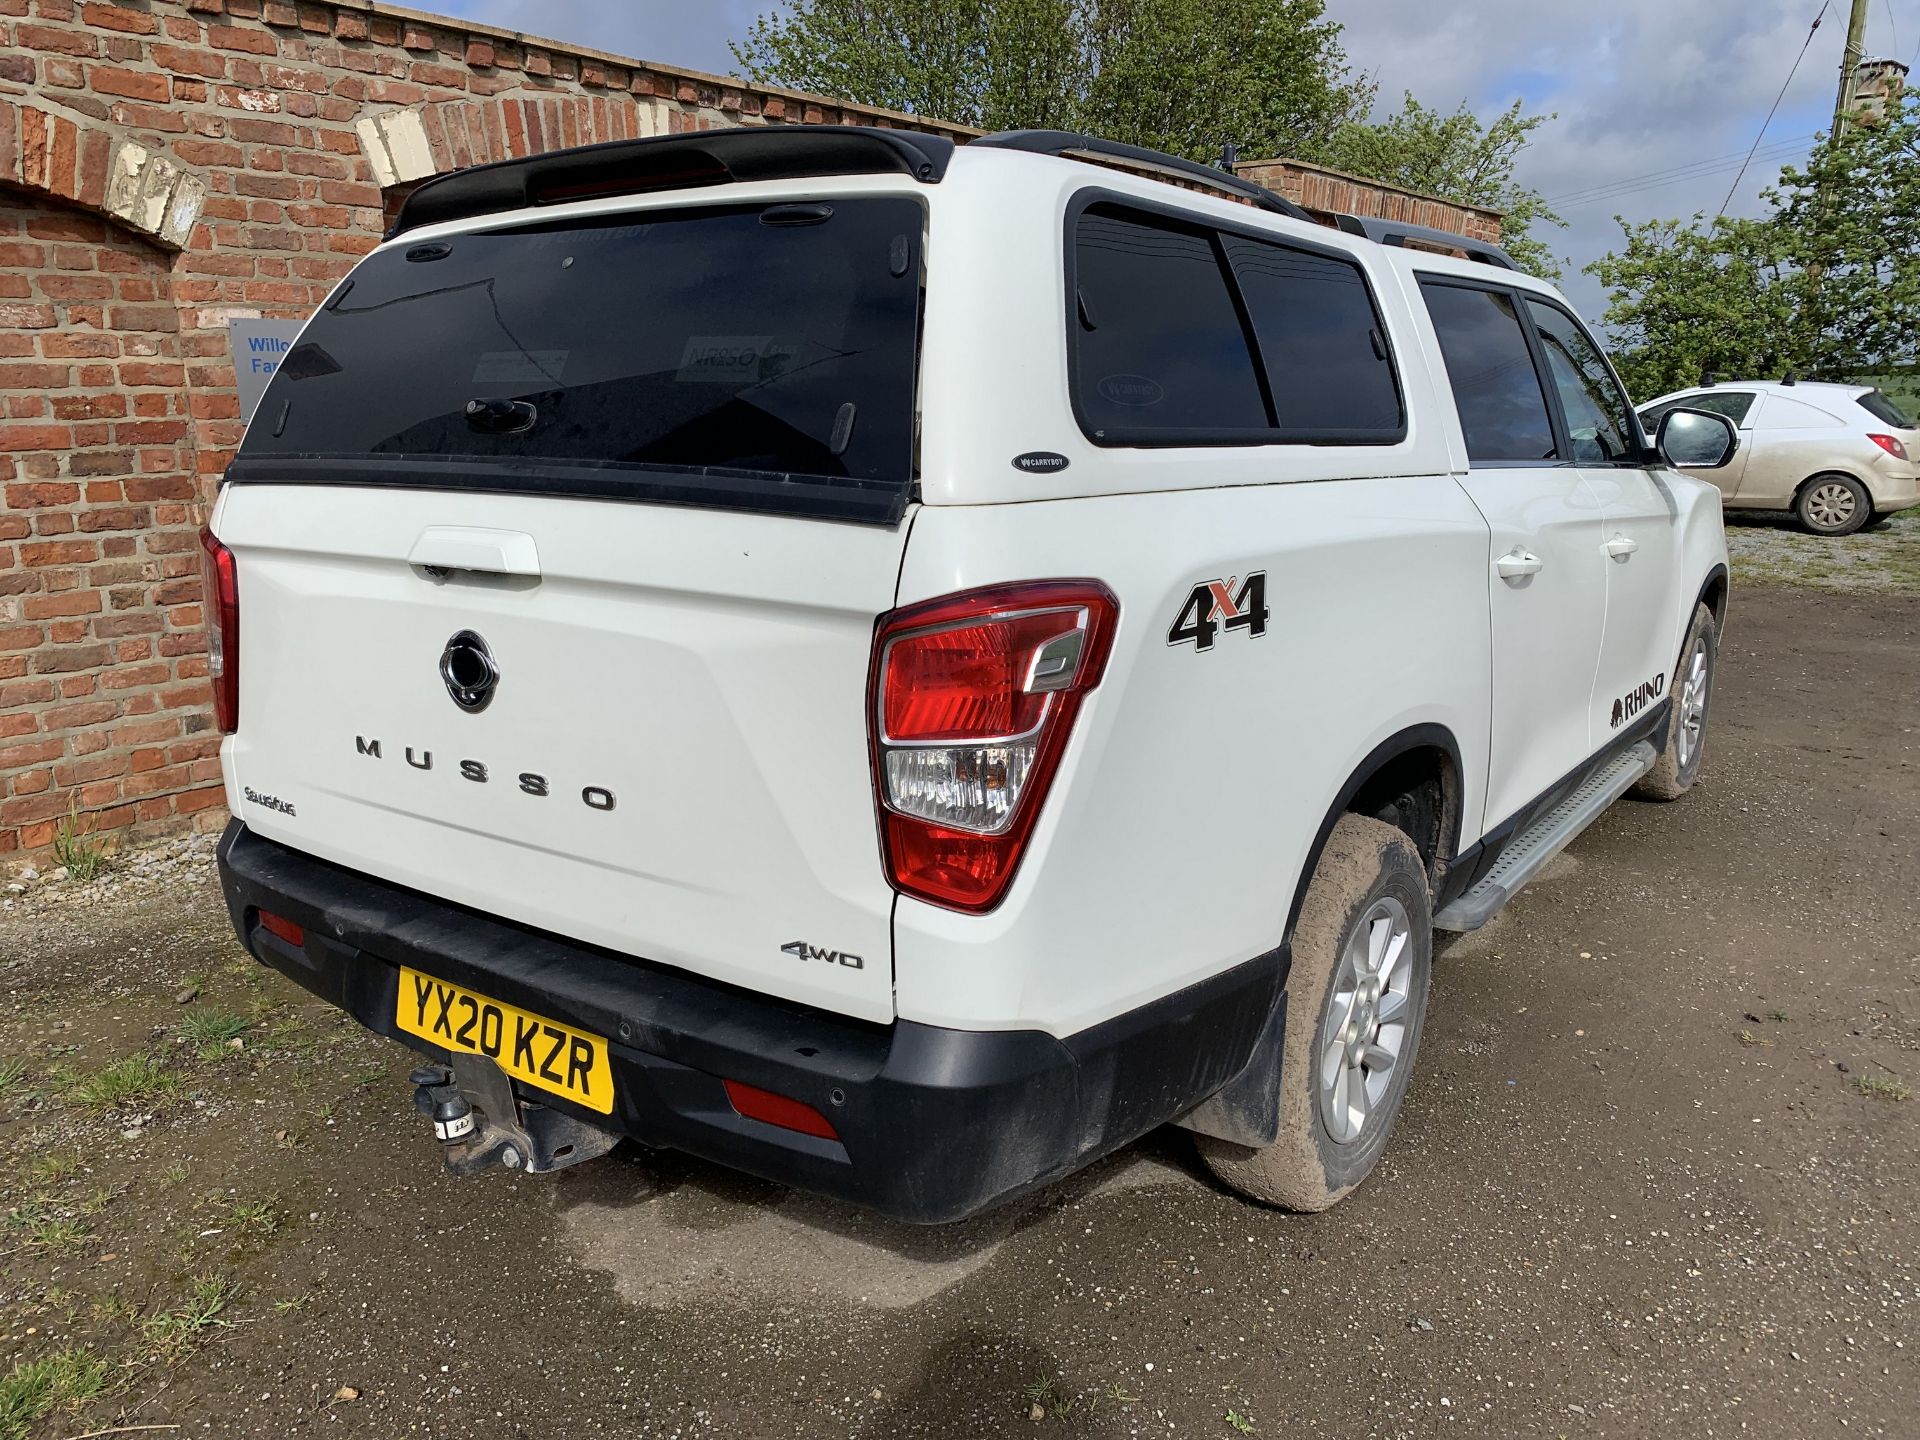 2020 Ssangyong Musso Rhino twin cab pickup, YX20 KZR, 38600 miles, 2.2l diesel, automatic, with - Image 8 of 10